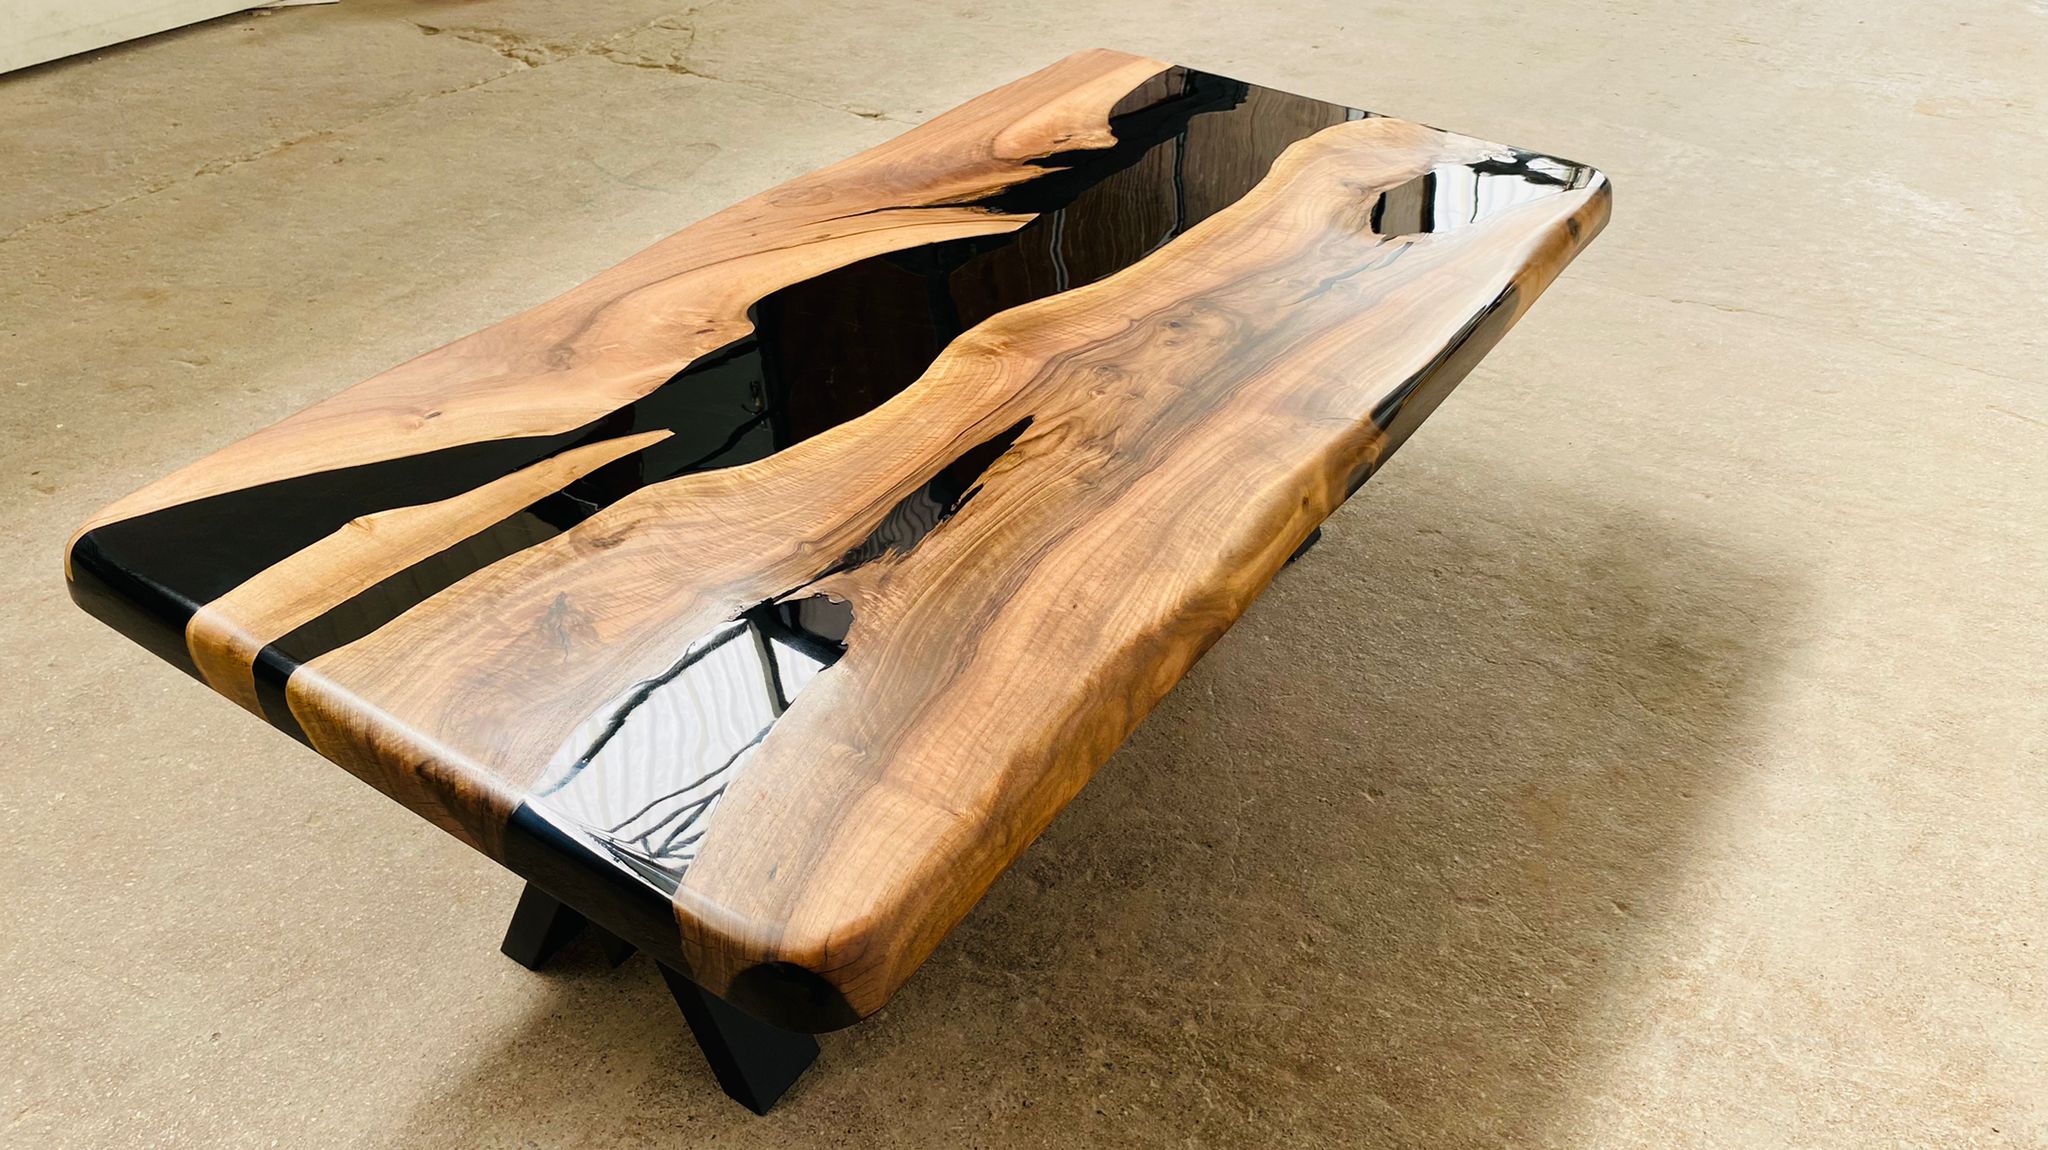 Black Epoxy Resin River Table Top For Handmade